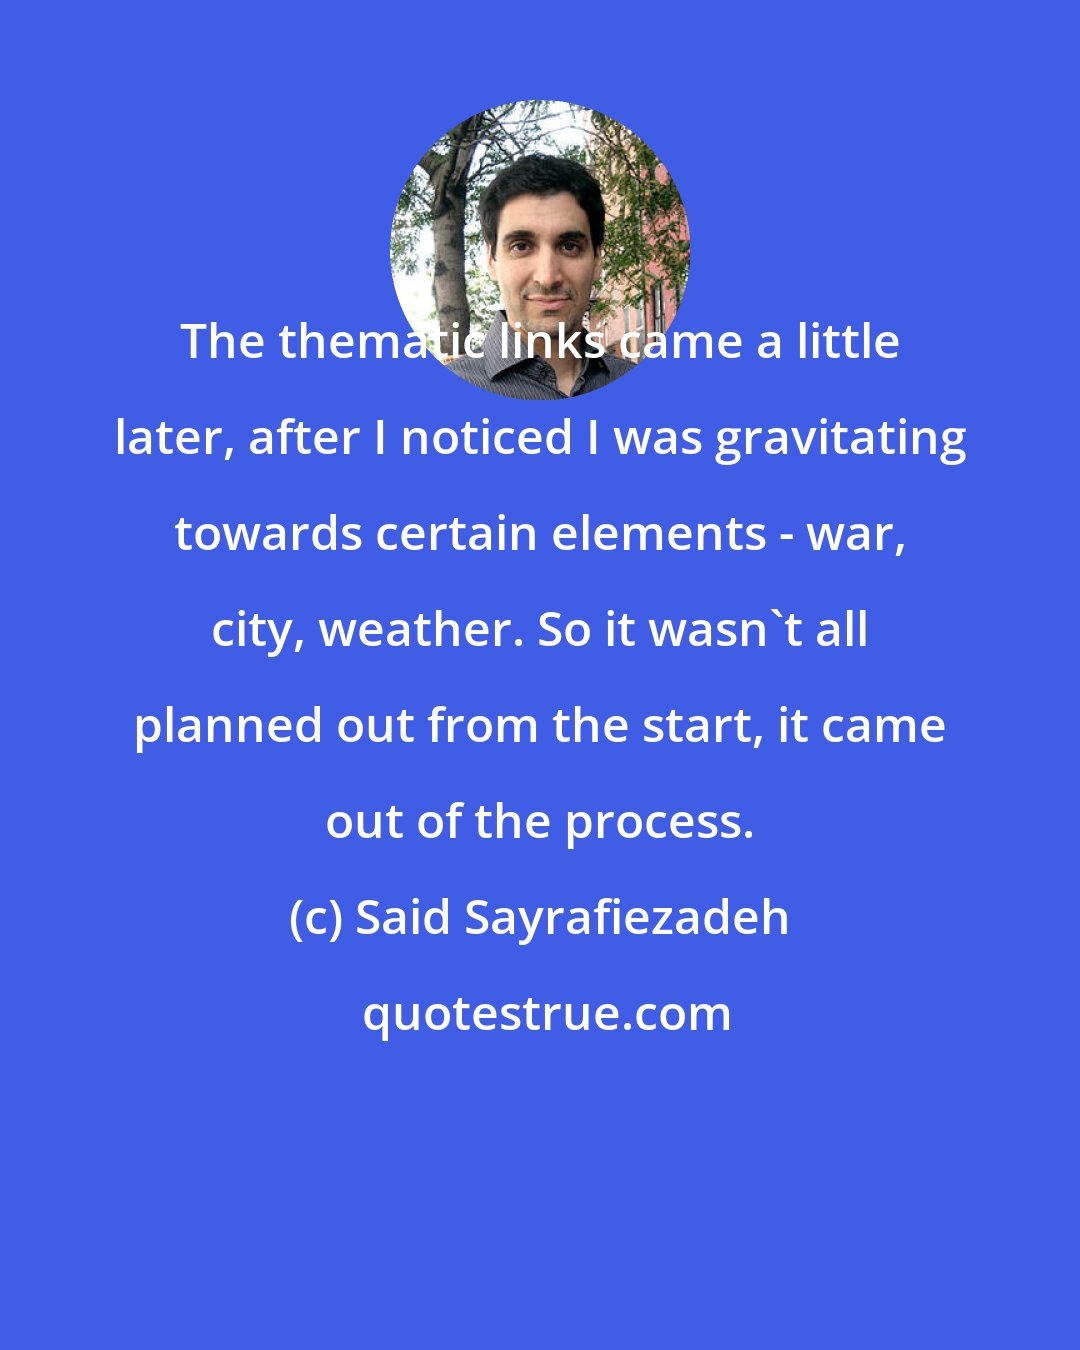 Said Sayrafiezadeh: The thematic links came a little later, after I noticed I was gravitating towards certain elements - war, city, weather. So it wasn't all planned out from the start, it came out of the process.